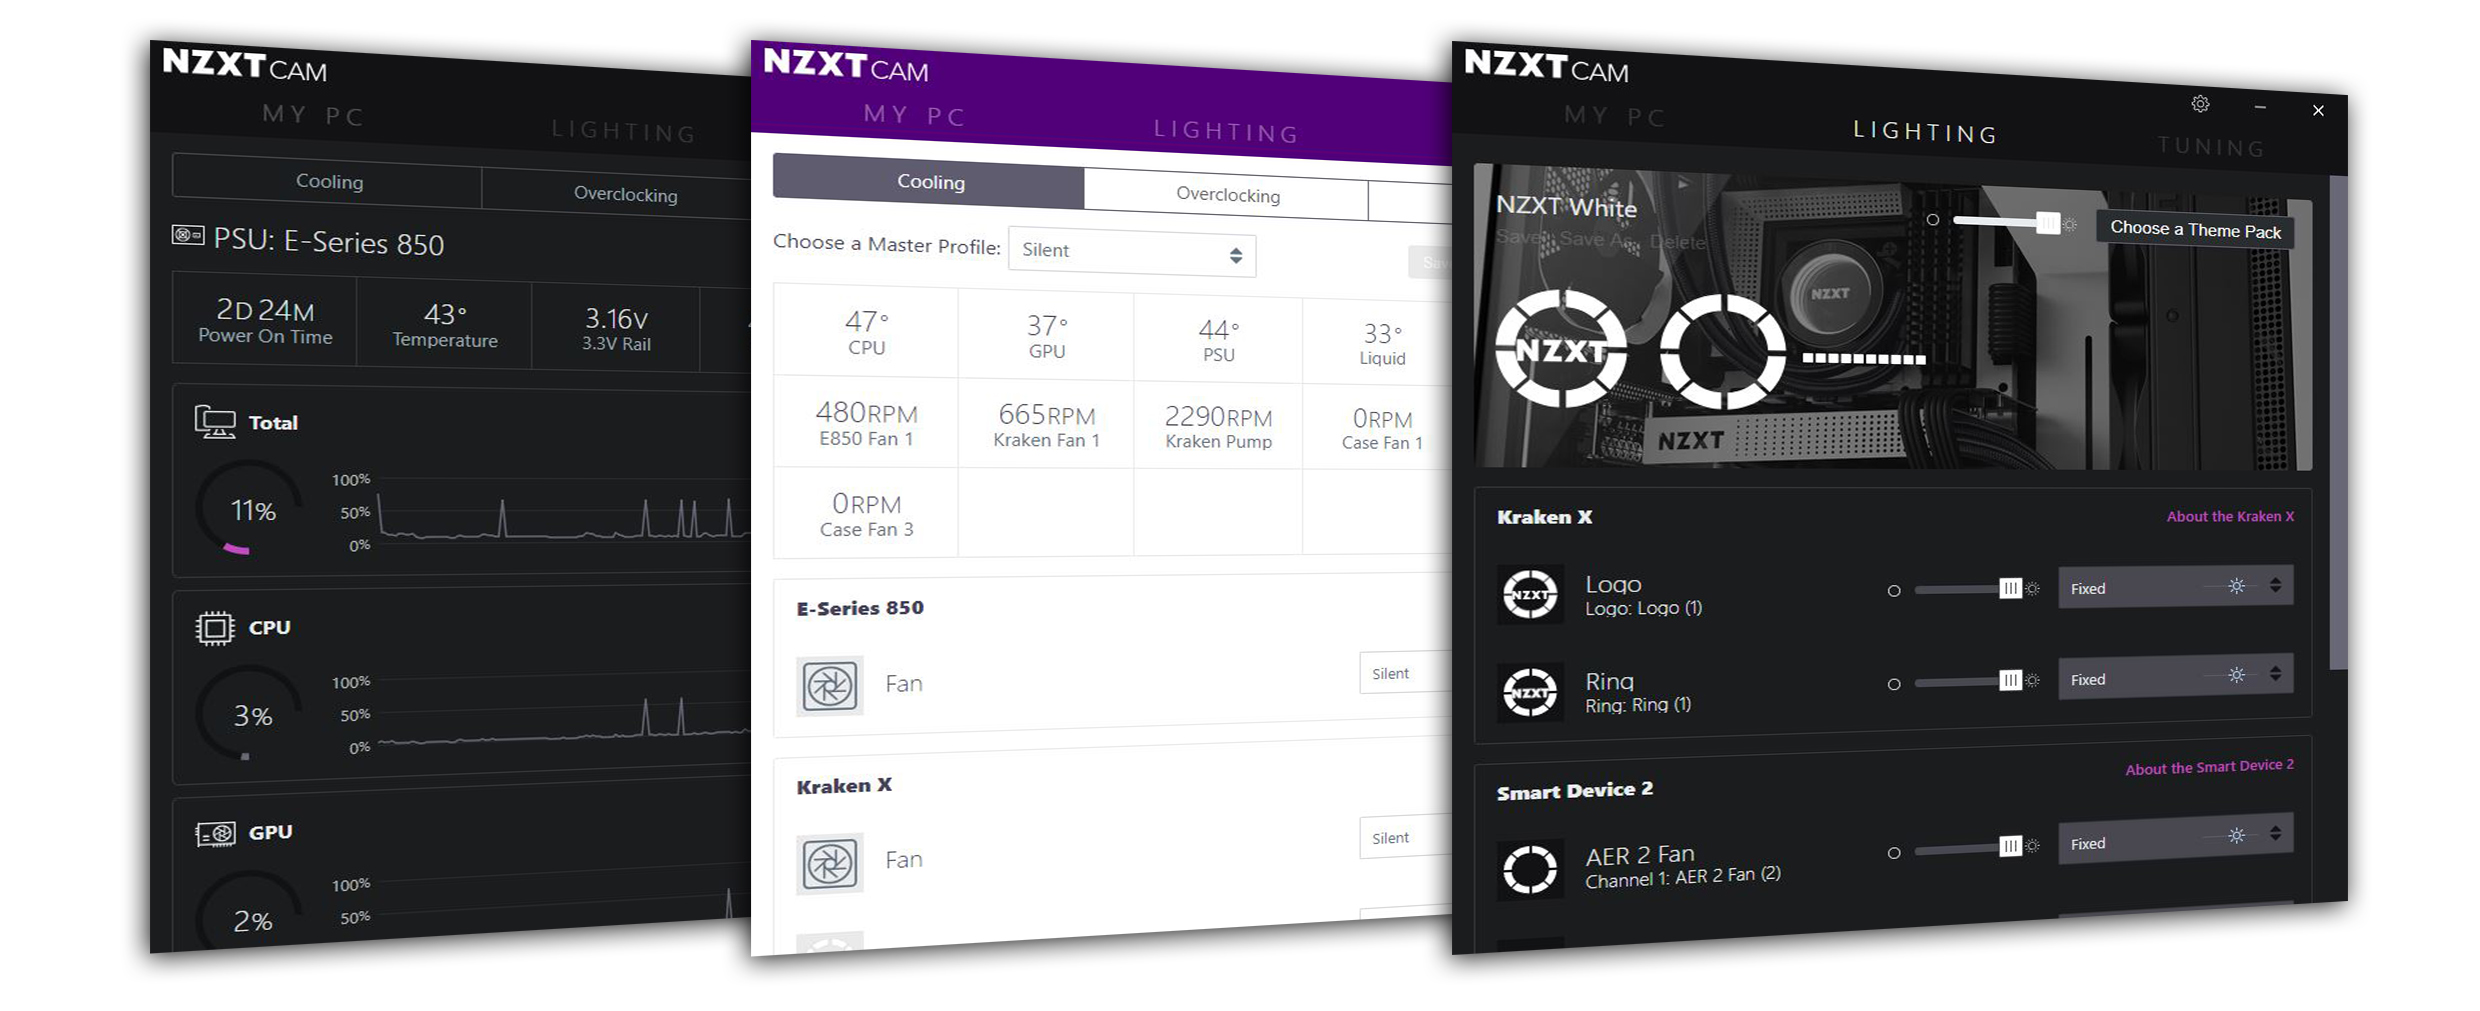 NZXT CAM Upgrades to Version 4.0 | Gaming PCs | NZXT